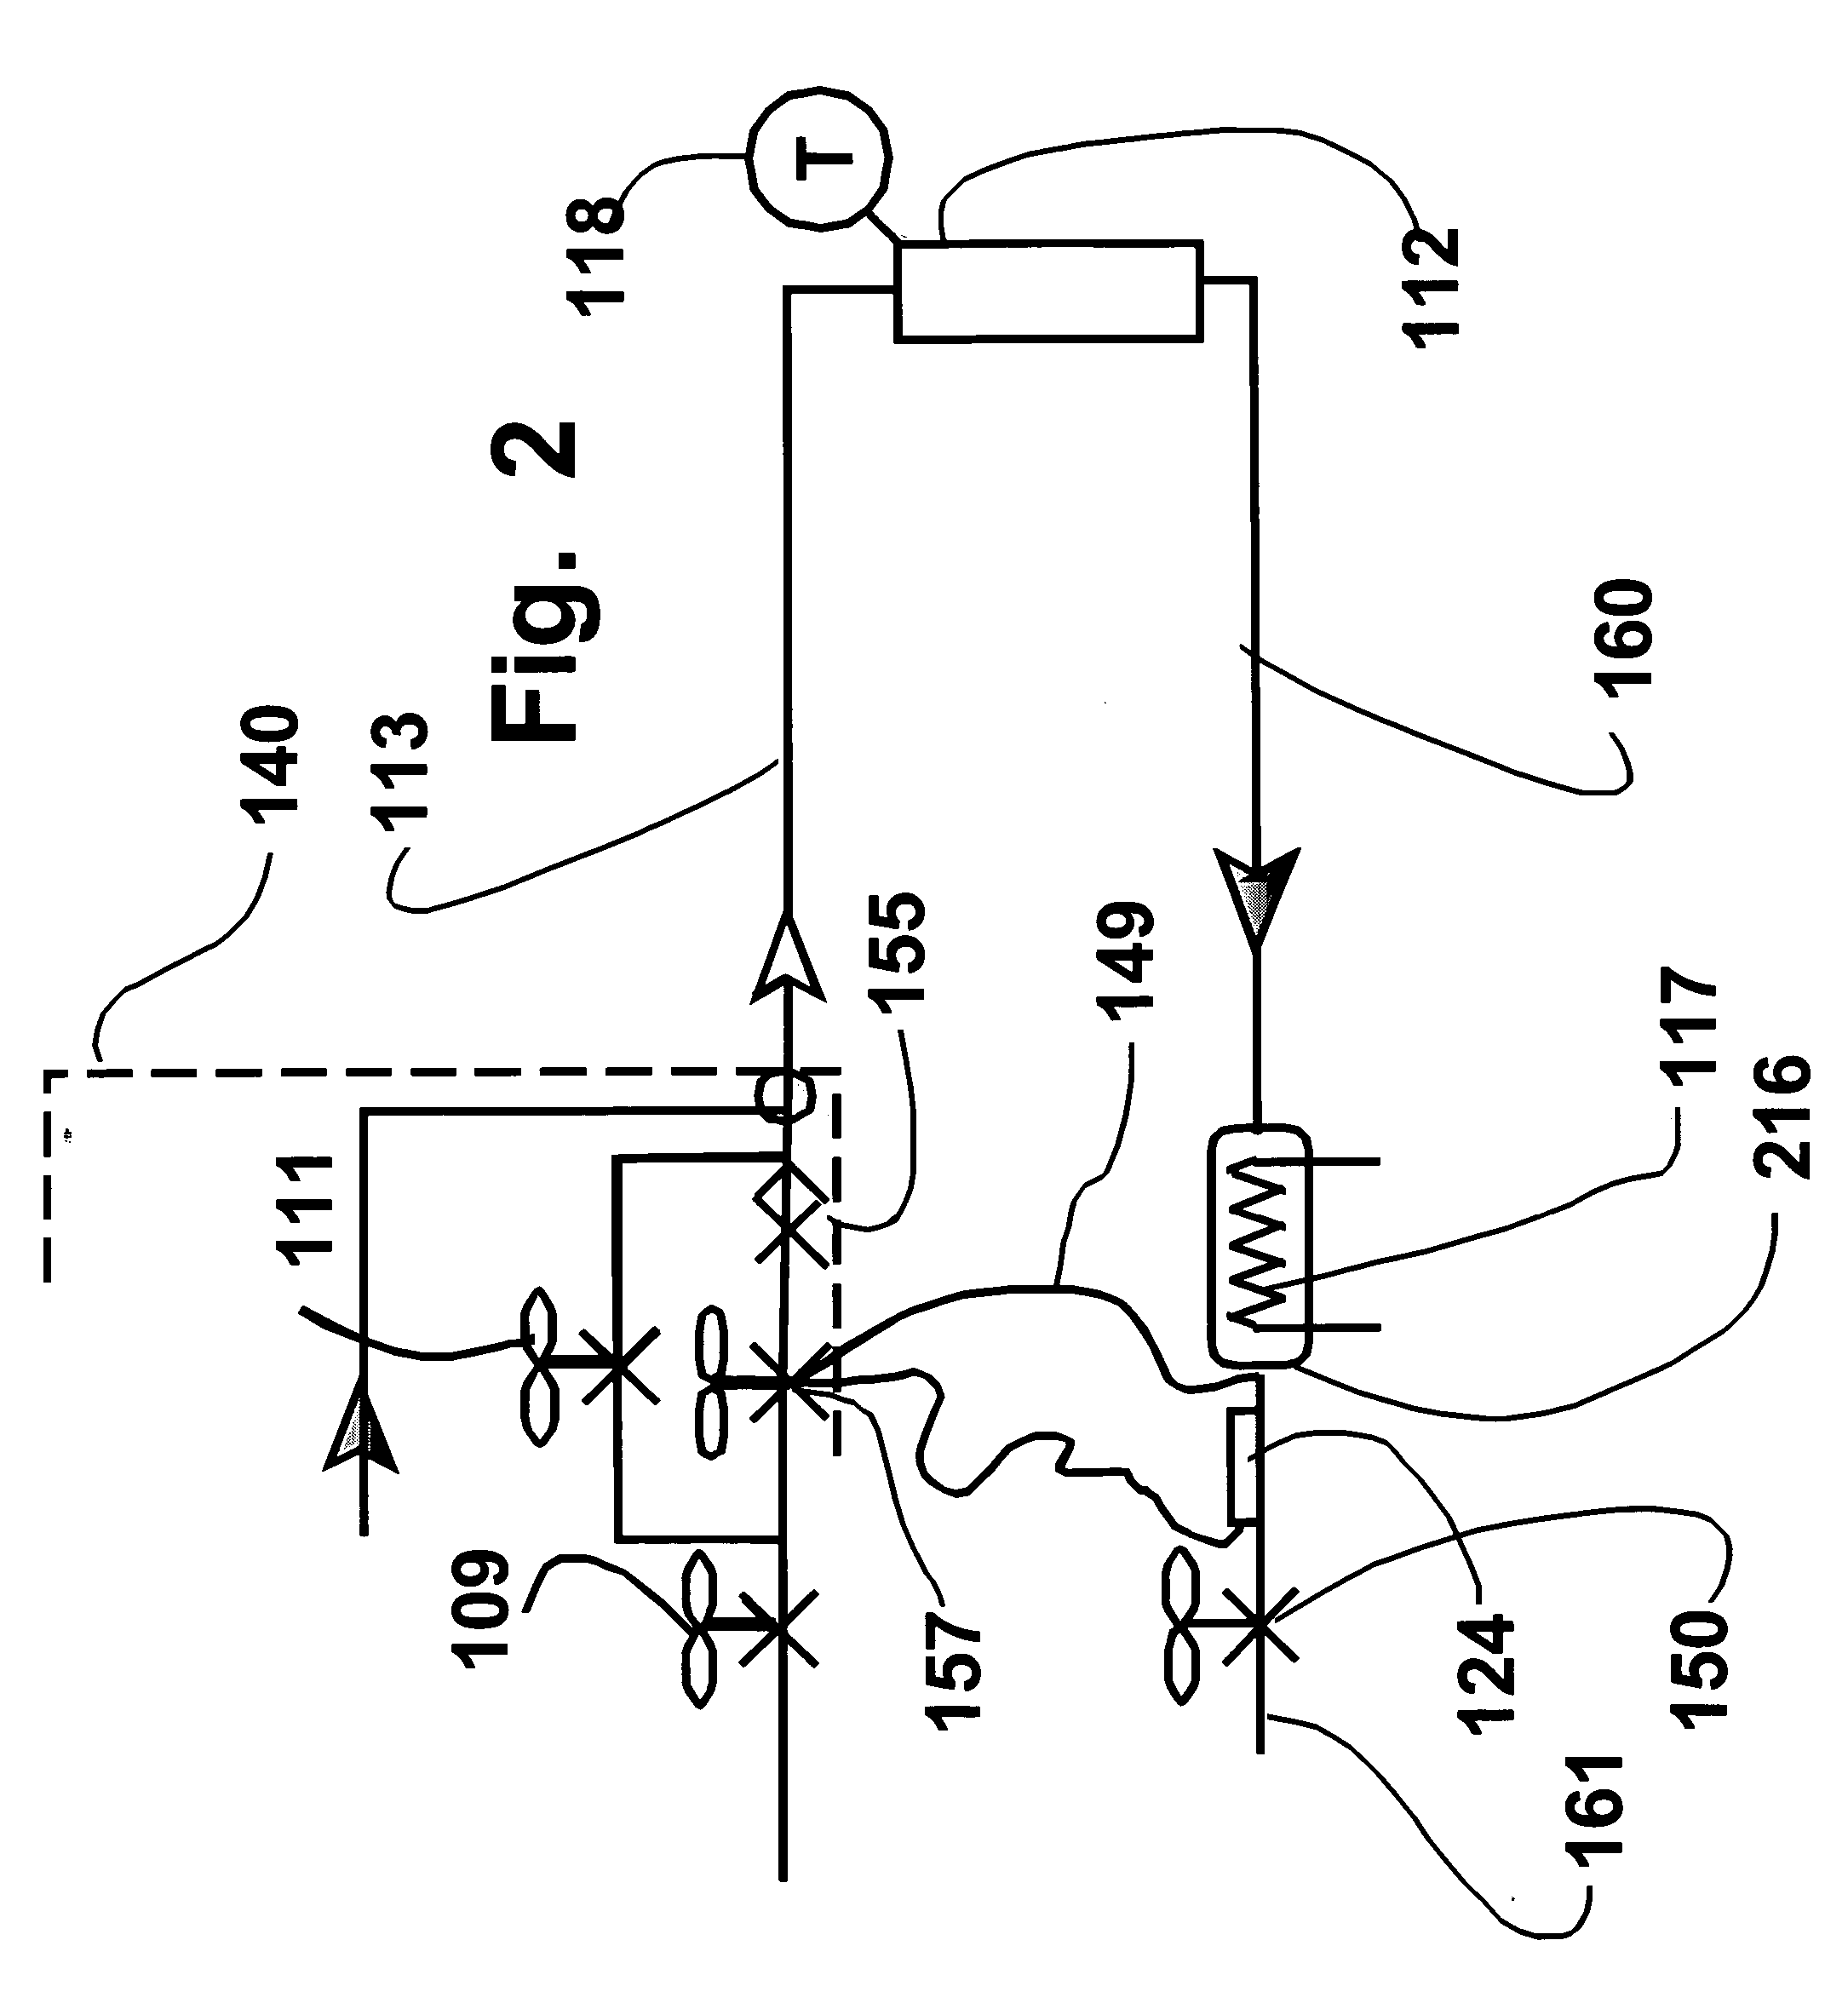 Thermal control system and method